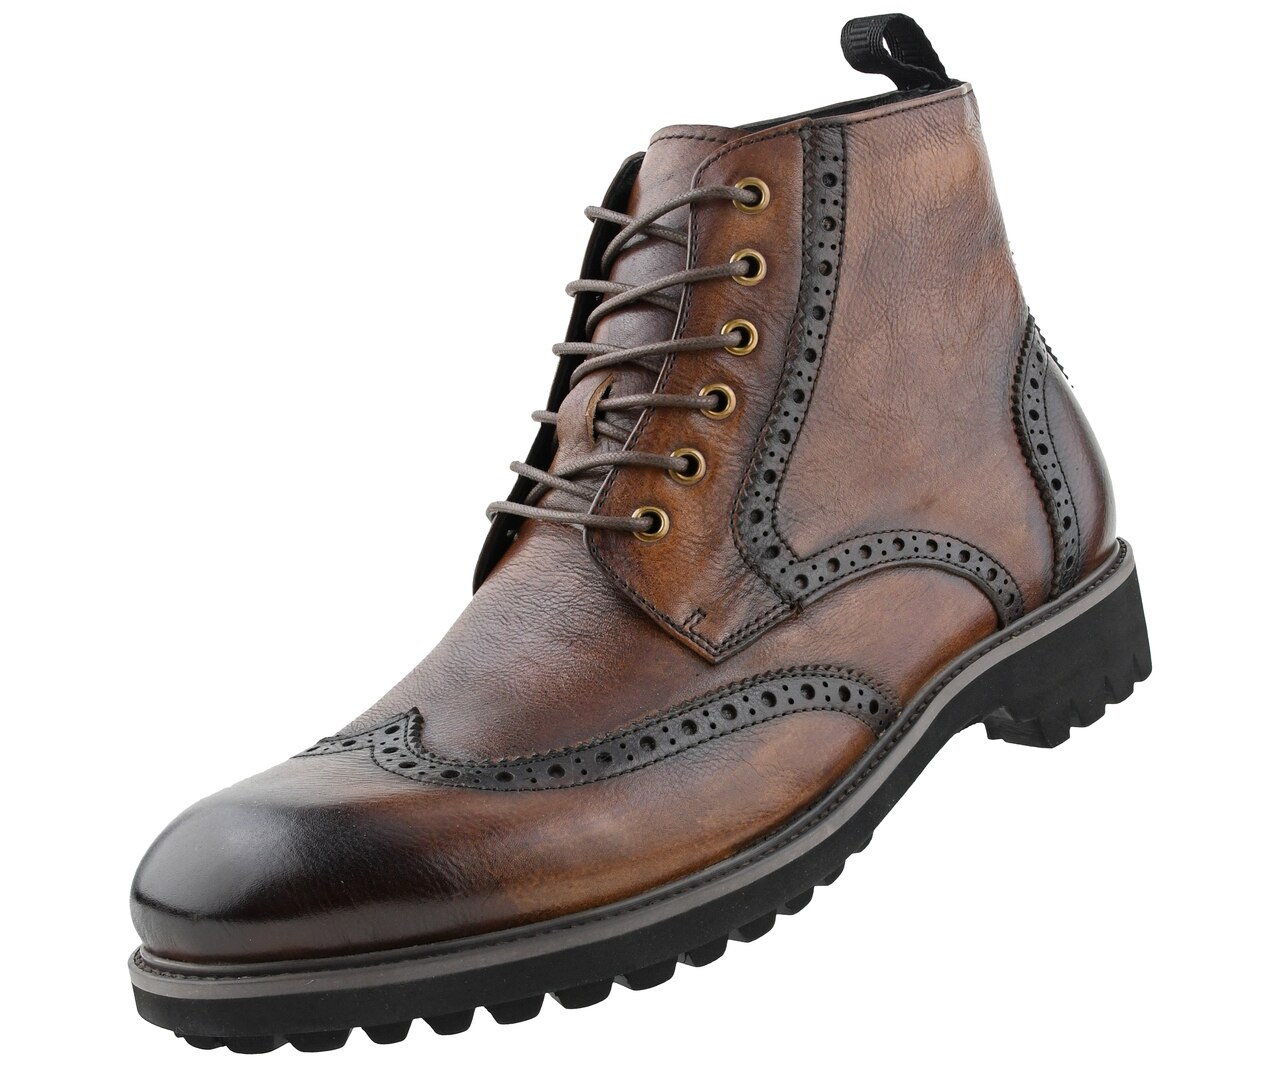 Men Dress Boot-1822 - Church Suits For Less